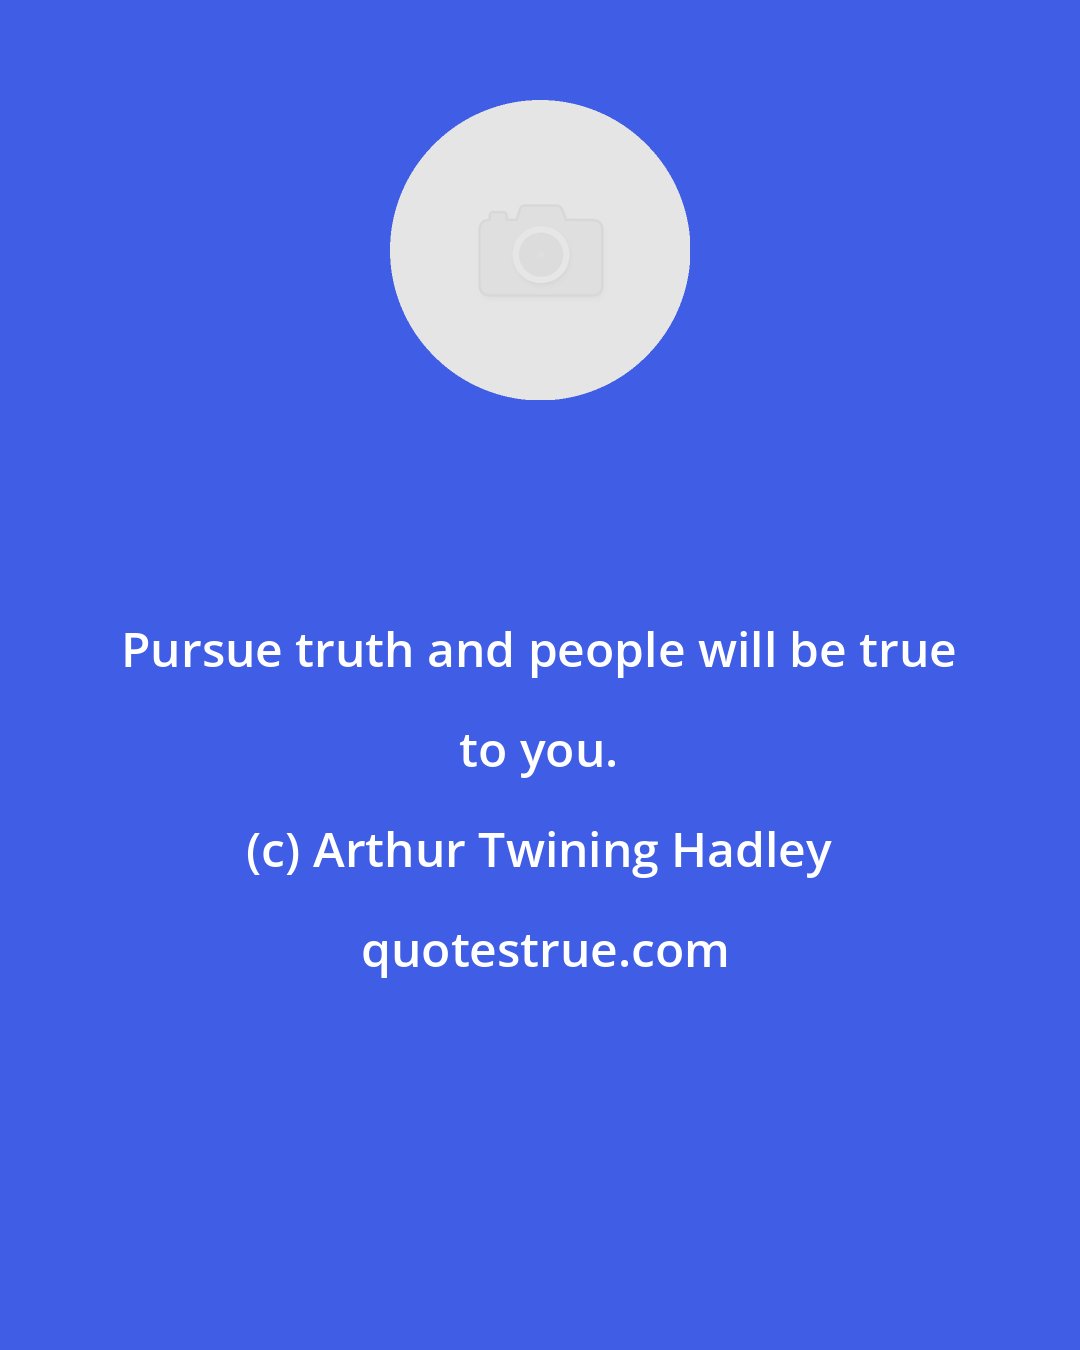 Arthur Twining Hadley: Pursue truth and people will be true to you.